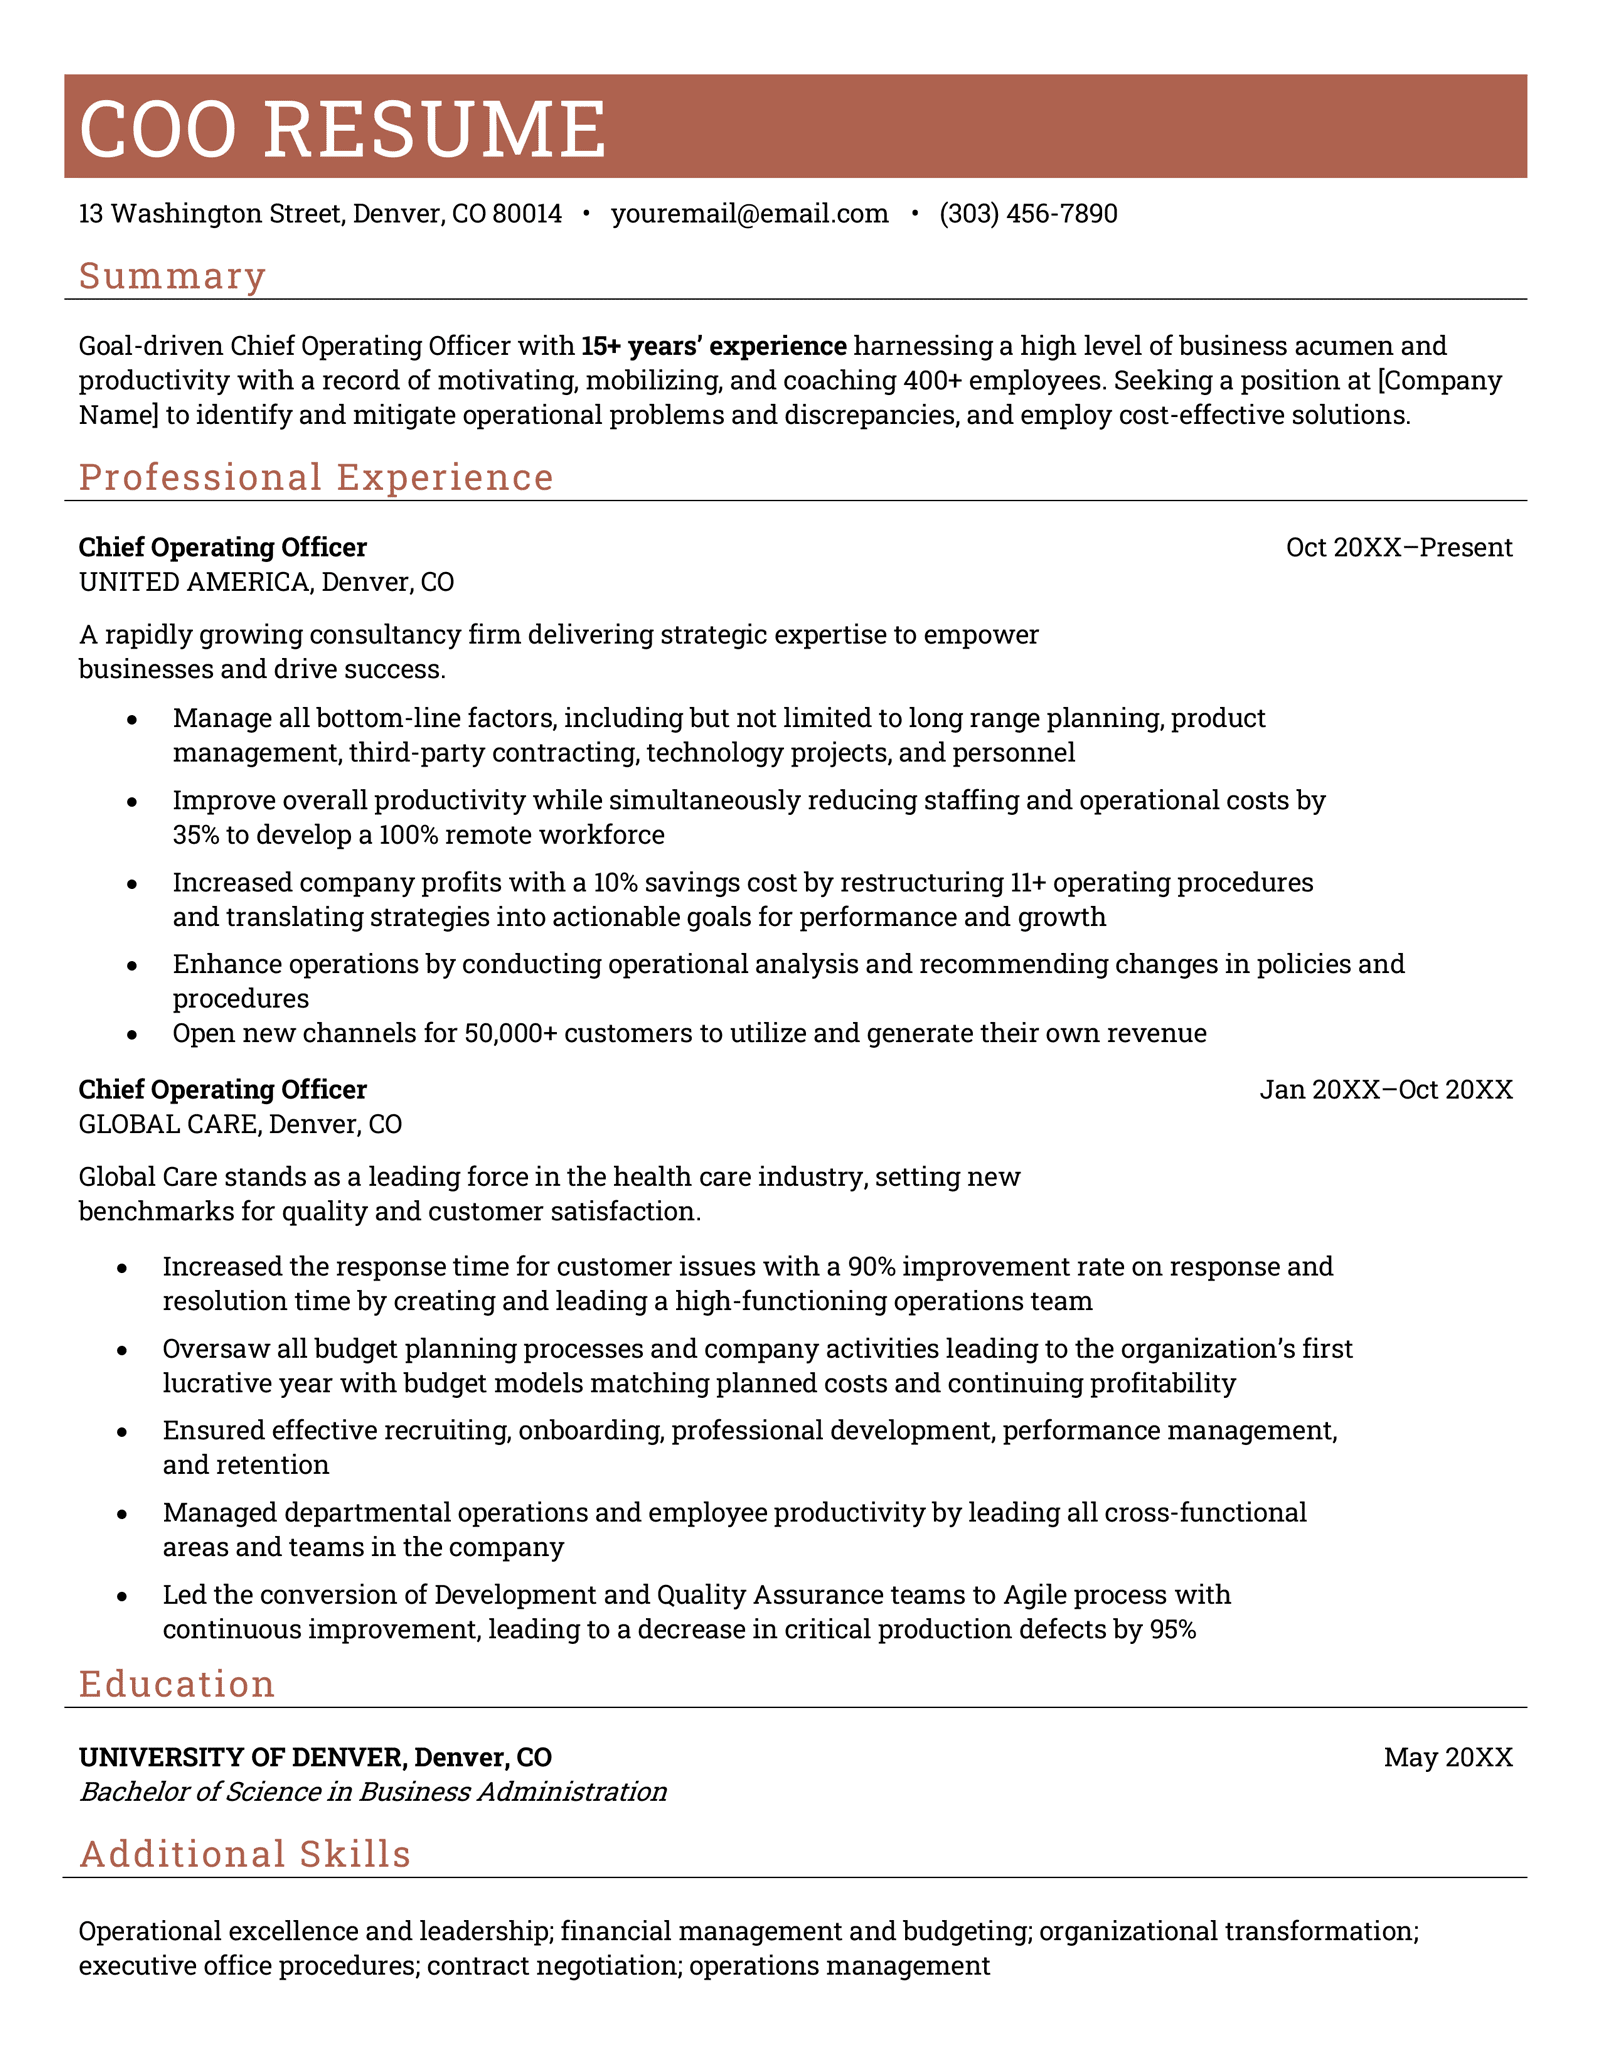 A chief operations officer (COO) resume example with a coral header and a summary, work experience section, education section, and skills section